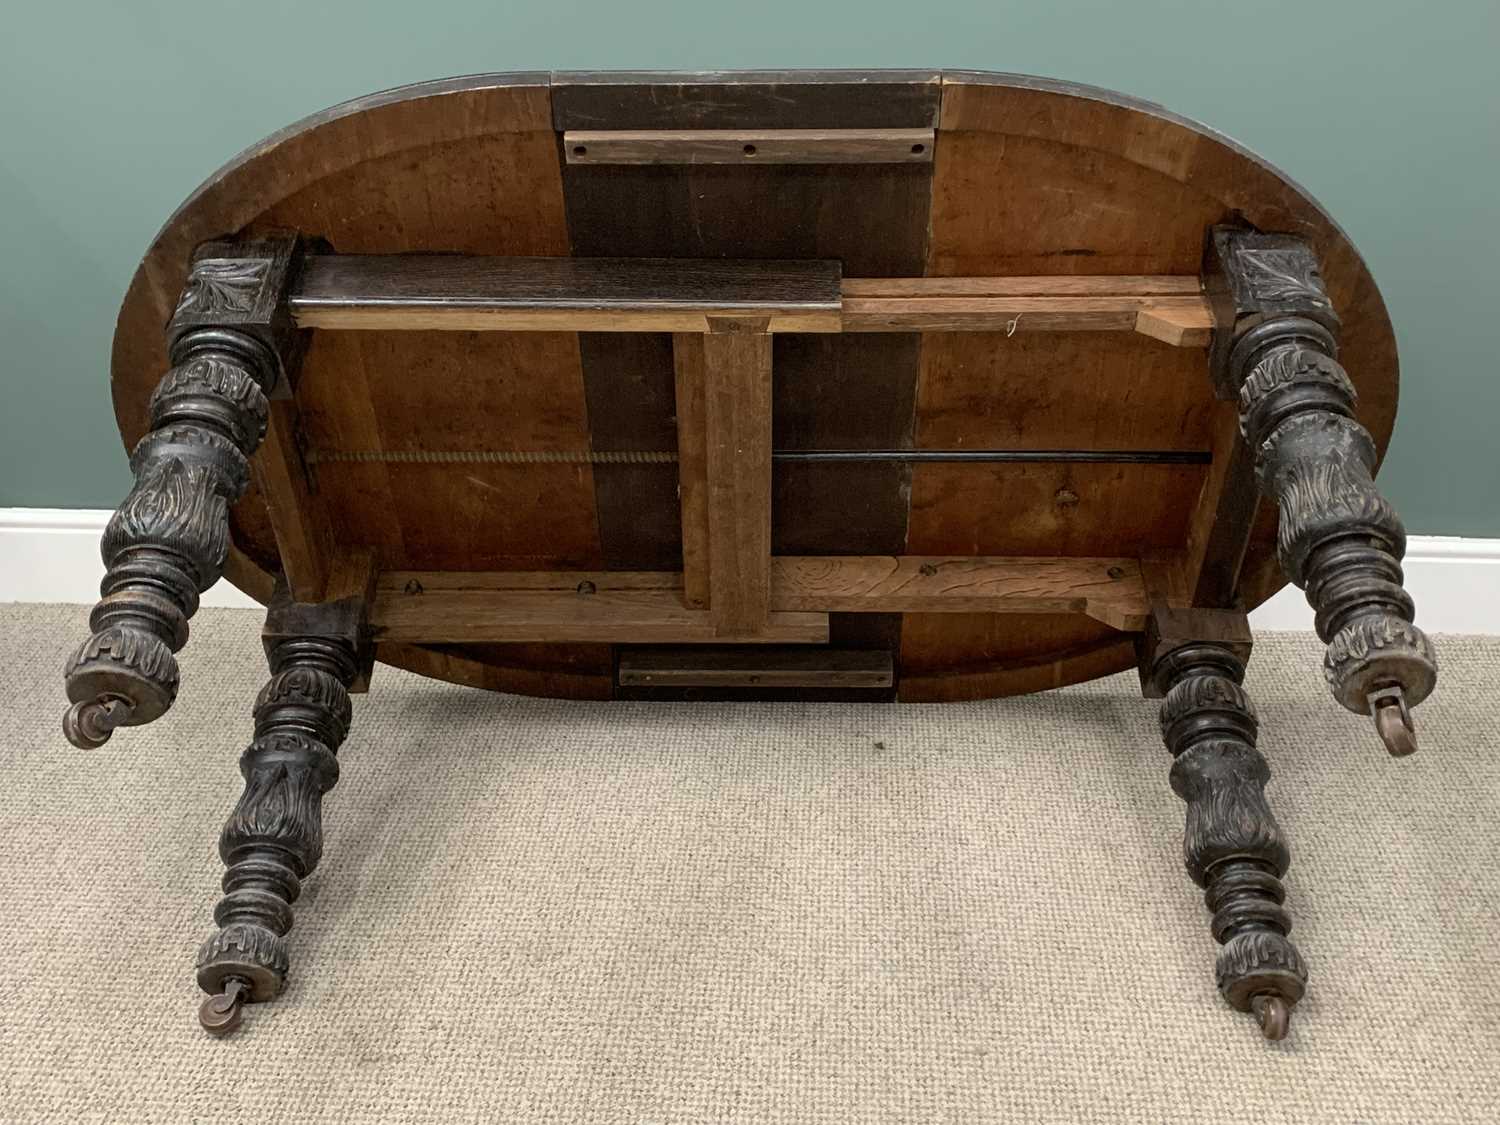 EDWARDIAN GOTHIC STYLE OAK CARVED DINING TABLE & SET OF SIX CHAIRS, 74 (h) x 163 (w) x 106cms (d) - Image 5 of 7